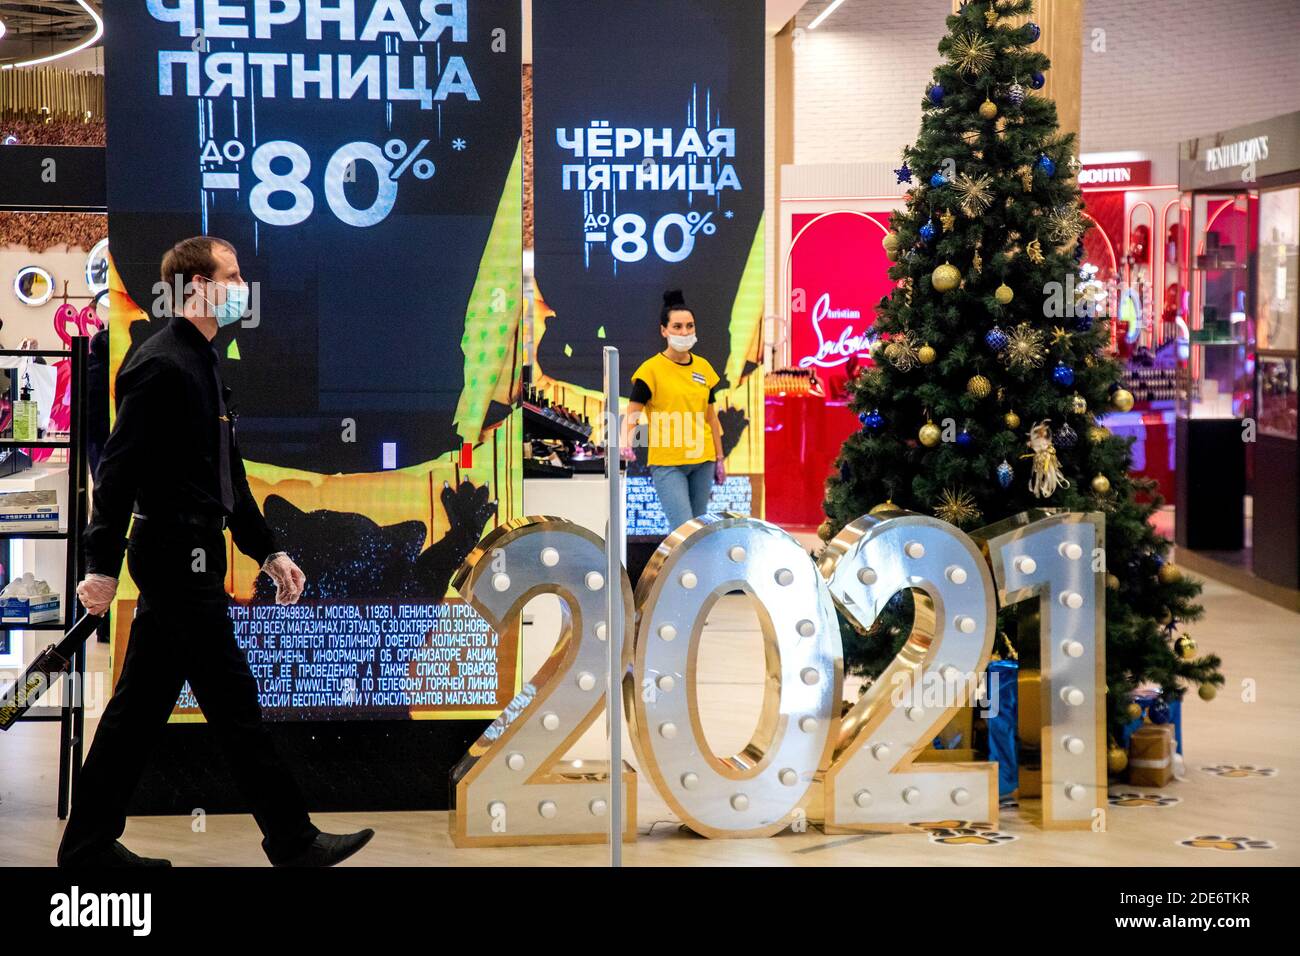 Moscow, Russia. 29th of November, 2020 employees perfume shop wearing face mask in the Aviapark shopping mall on the Black Friday sales days during the novel coronavirus COVID-19 pandemic in Russia. The posters read "Black Friday". The term Black Friday was coined in the United States in the 1960s; it refers to the Friday following Thanksgiving Day celebrated in the US on the fourth Thursday of November. Being the biggest shopping event of the year, Black Friday opens the Christmas shopping season Stock Photo